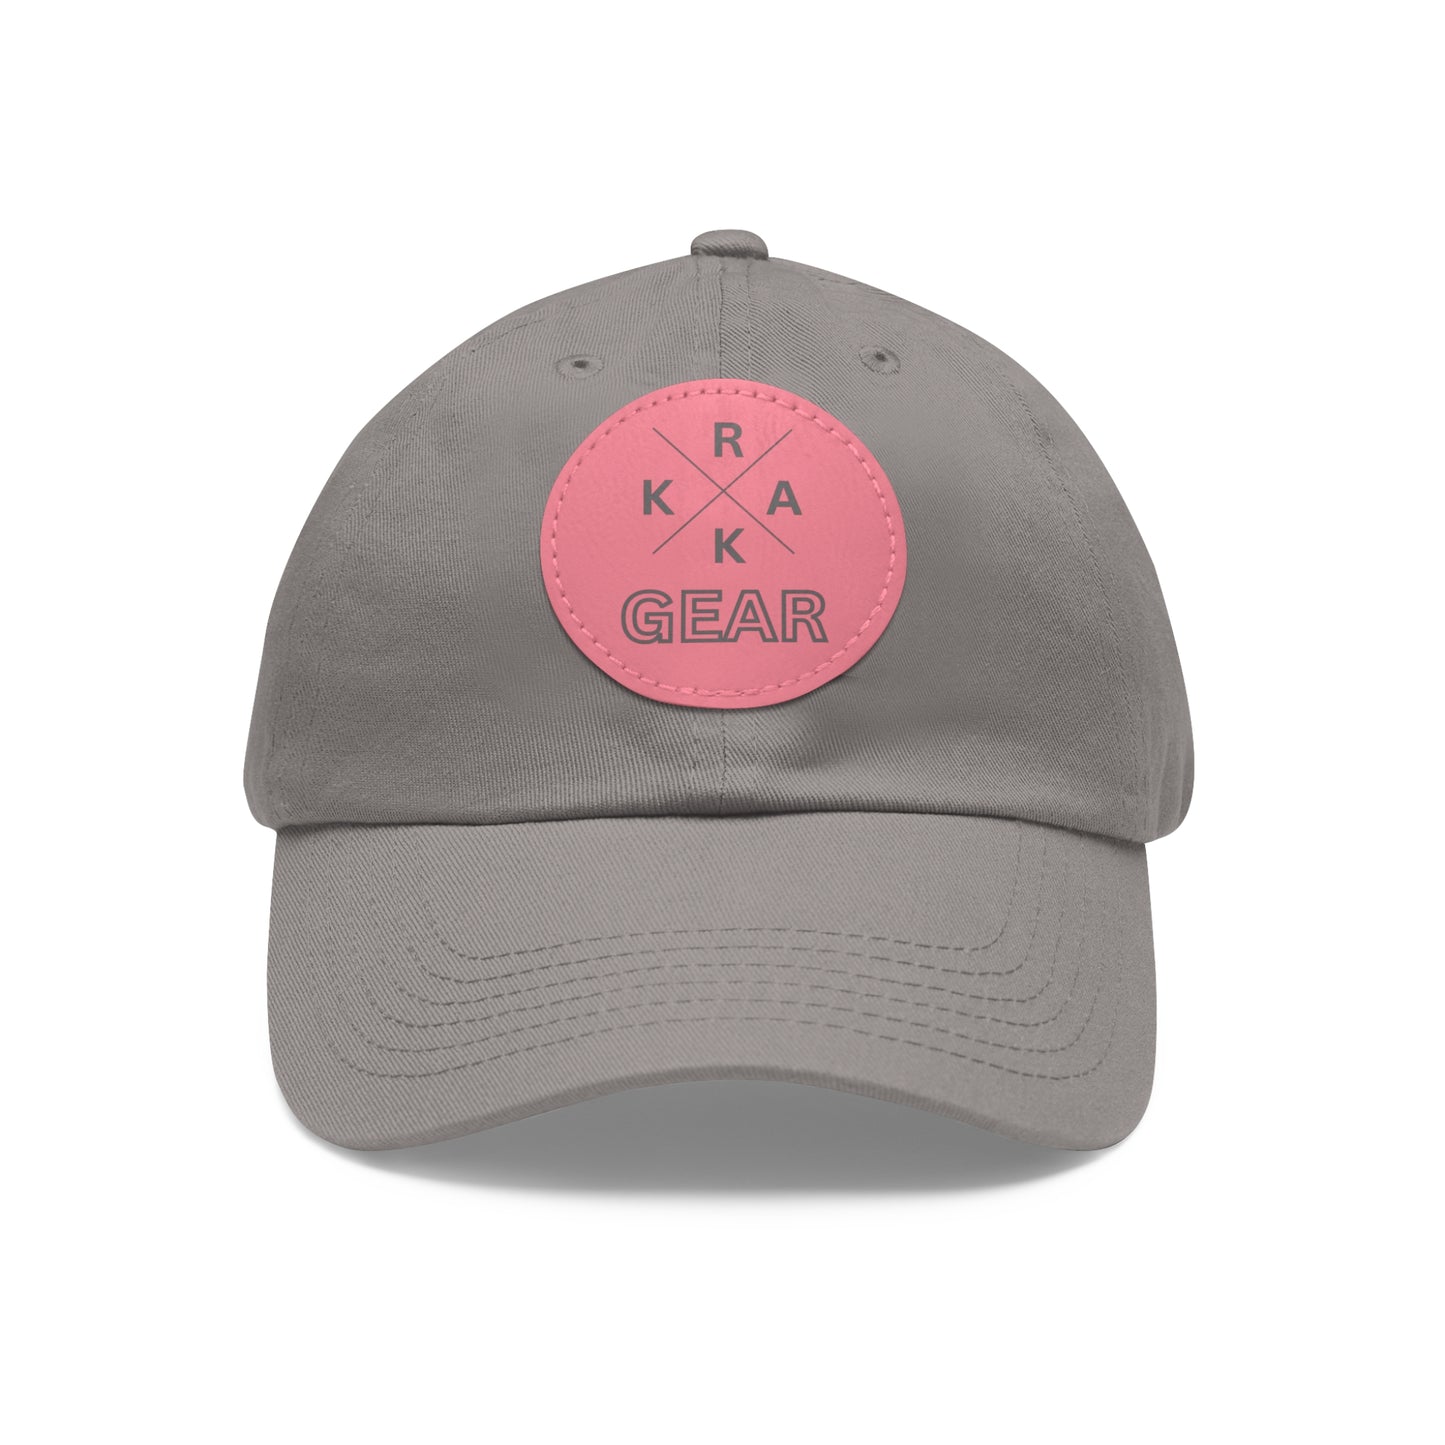 Rakkgear Grey Hat with Pink Leather X Logo Patch: Cap featuring the iconic Rakkgear X Logo on a finely embroidered leather patch on the front